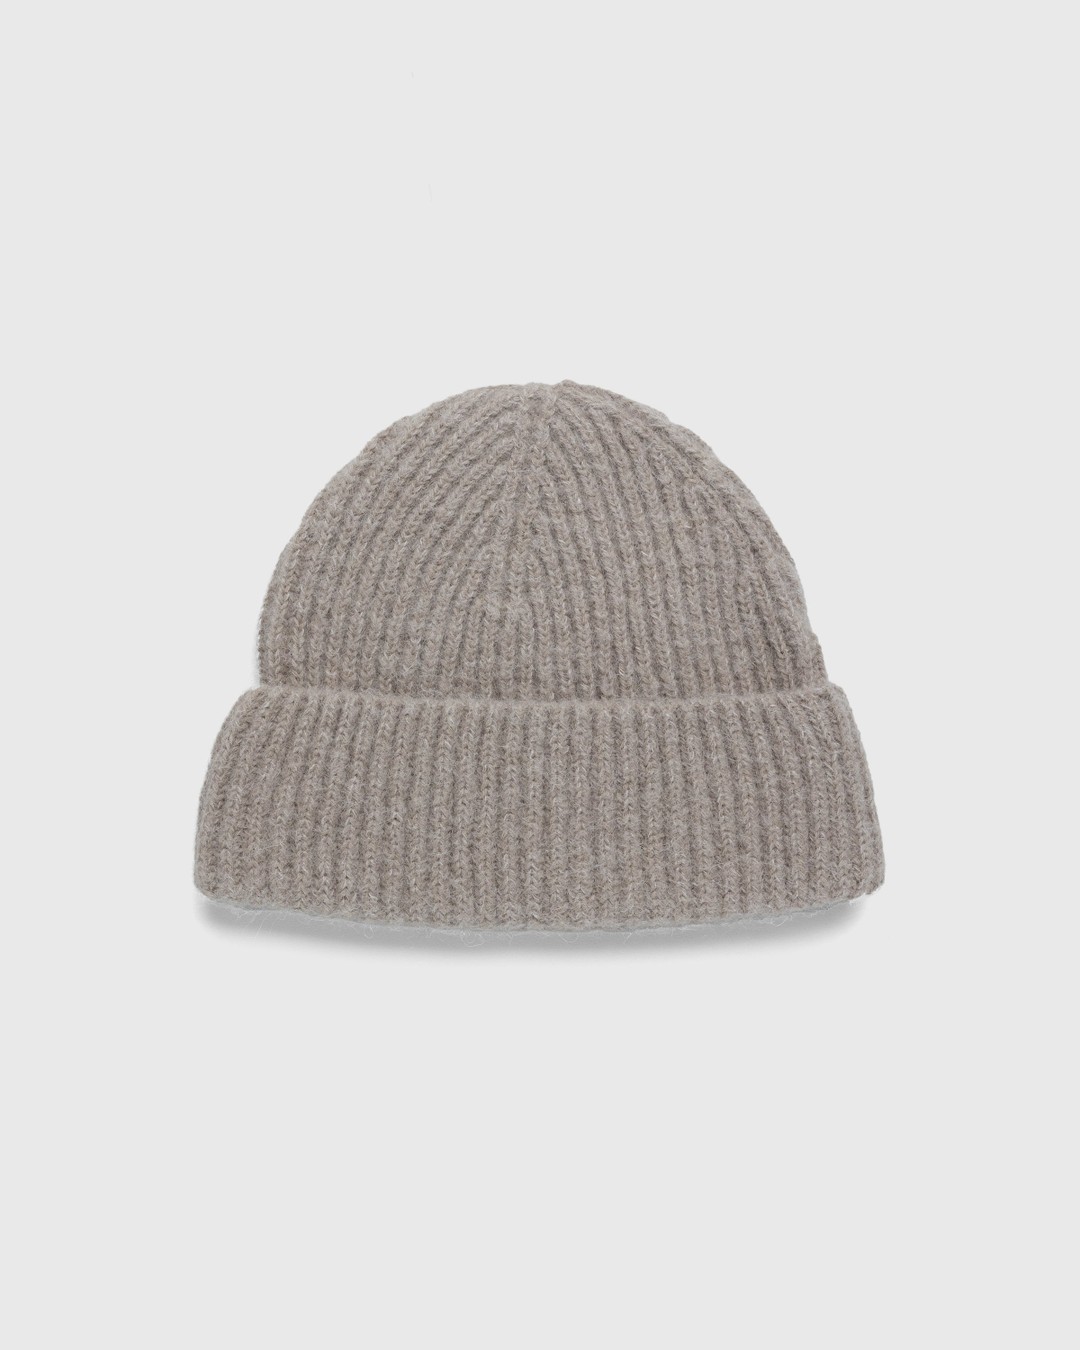 Our Legacy – Knit Hat Beige - Beanies - Beige - Image 1